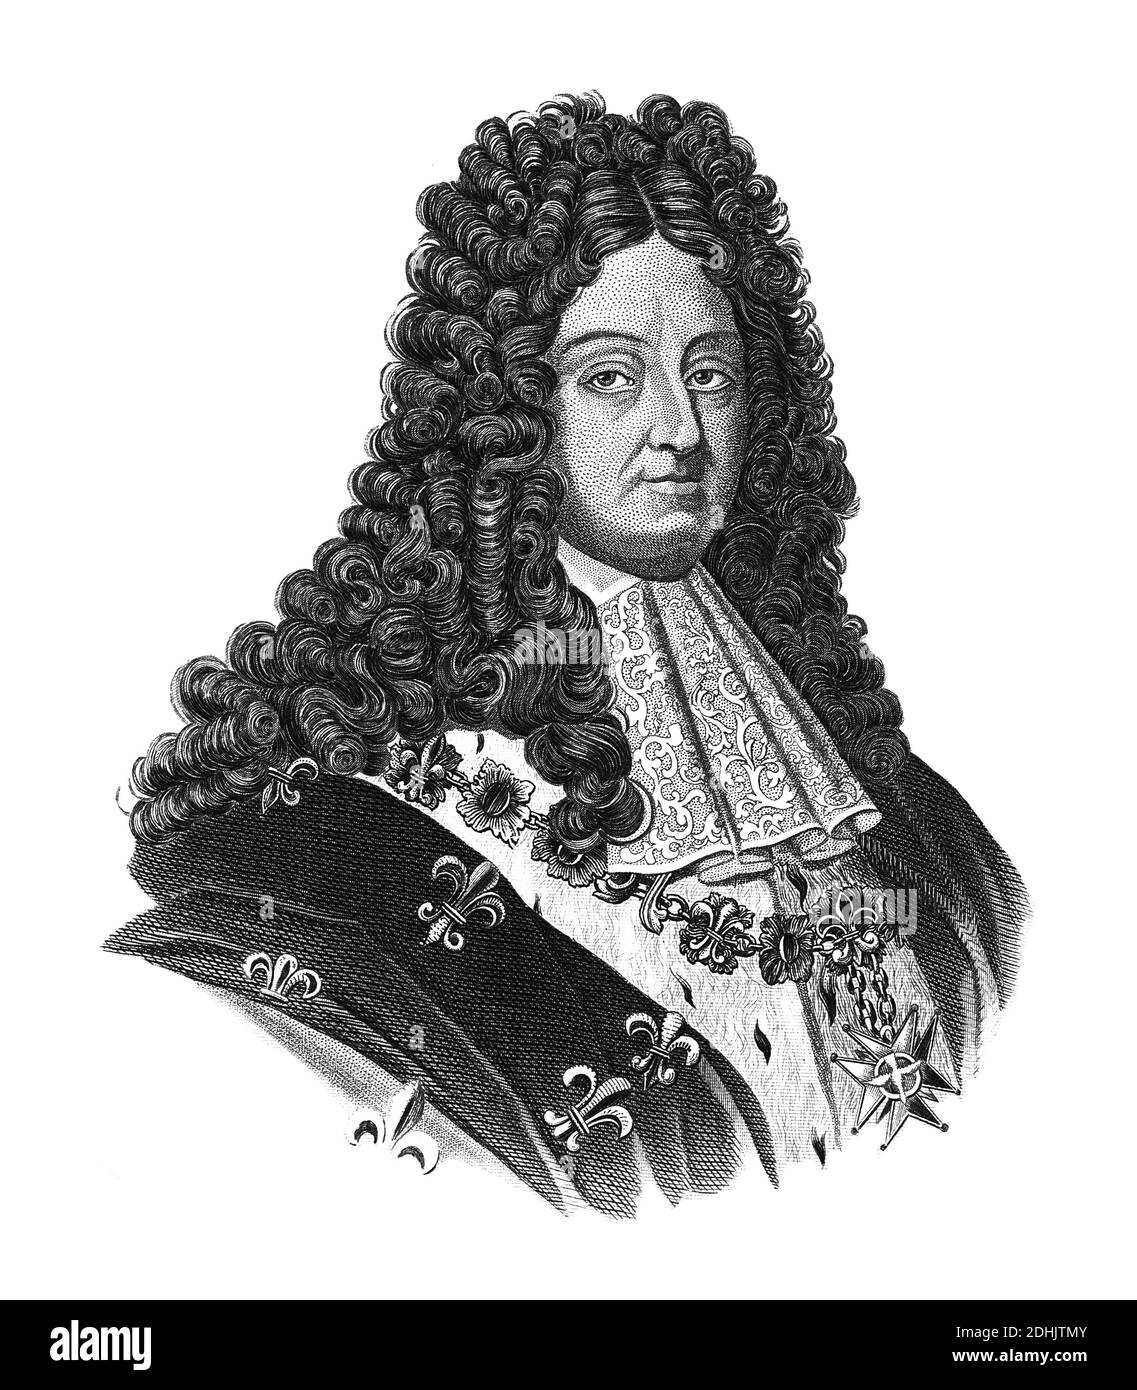 19th-century illustration of Louis XIV (1638 – 1715), known as Louis the Great or the Sun King, was a monarch of the House of Bourbon who ruled as Kin Stock Photo